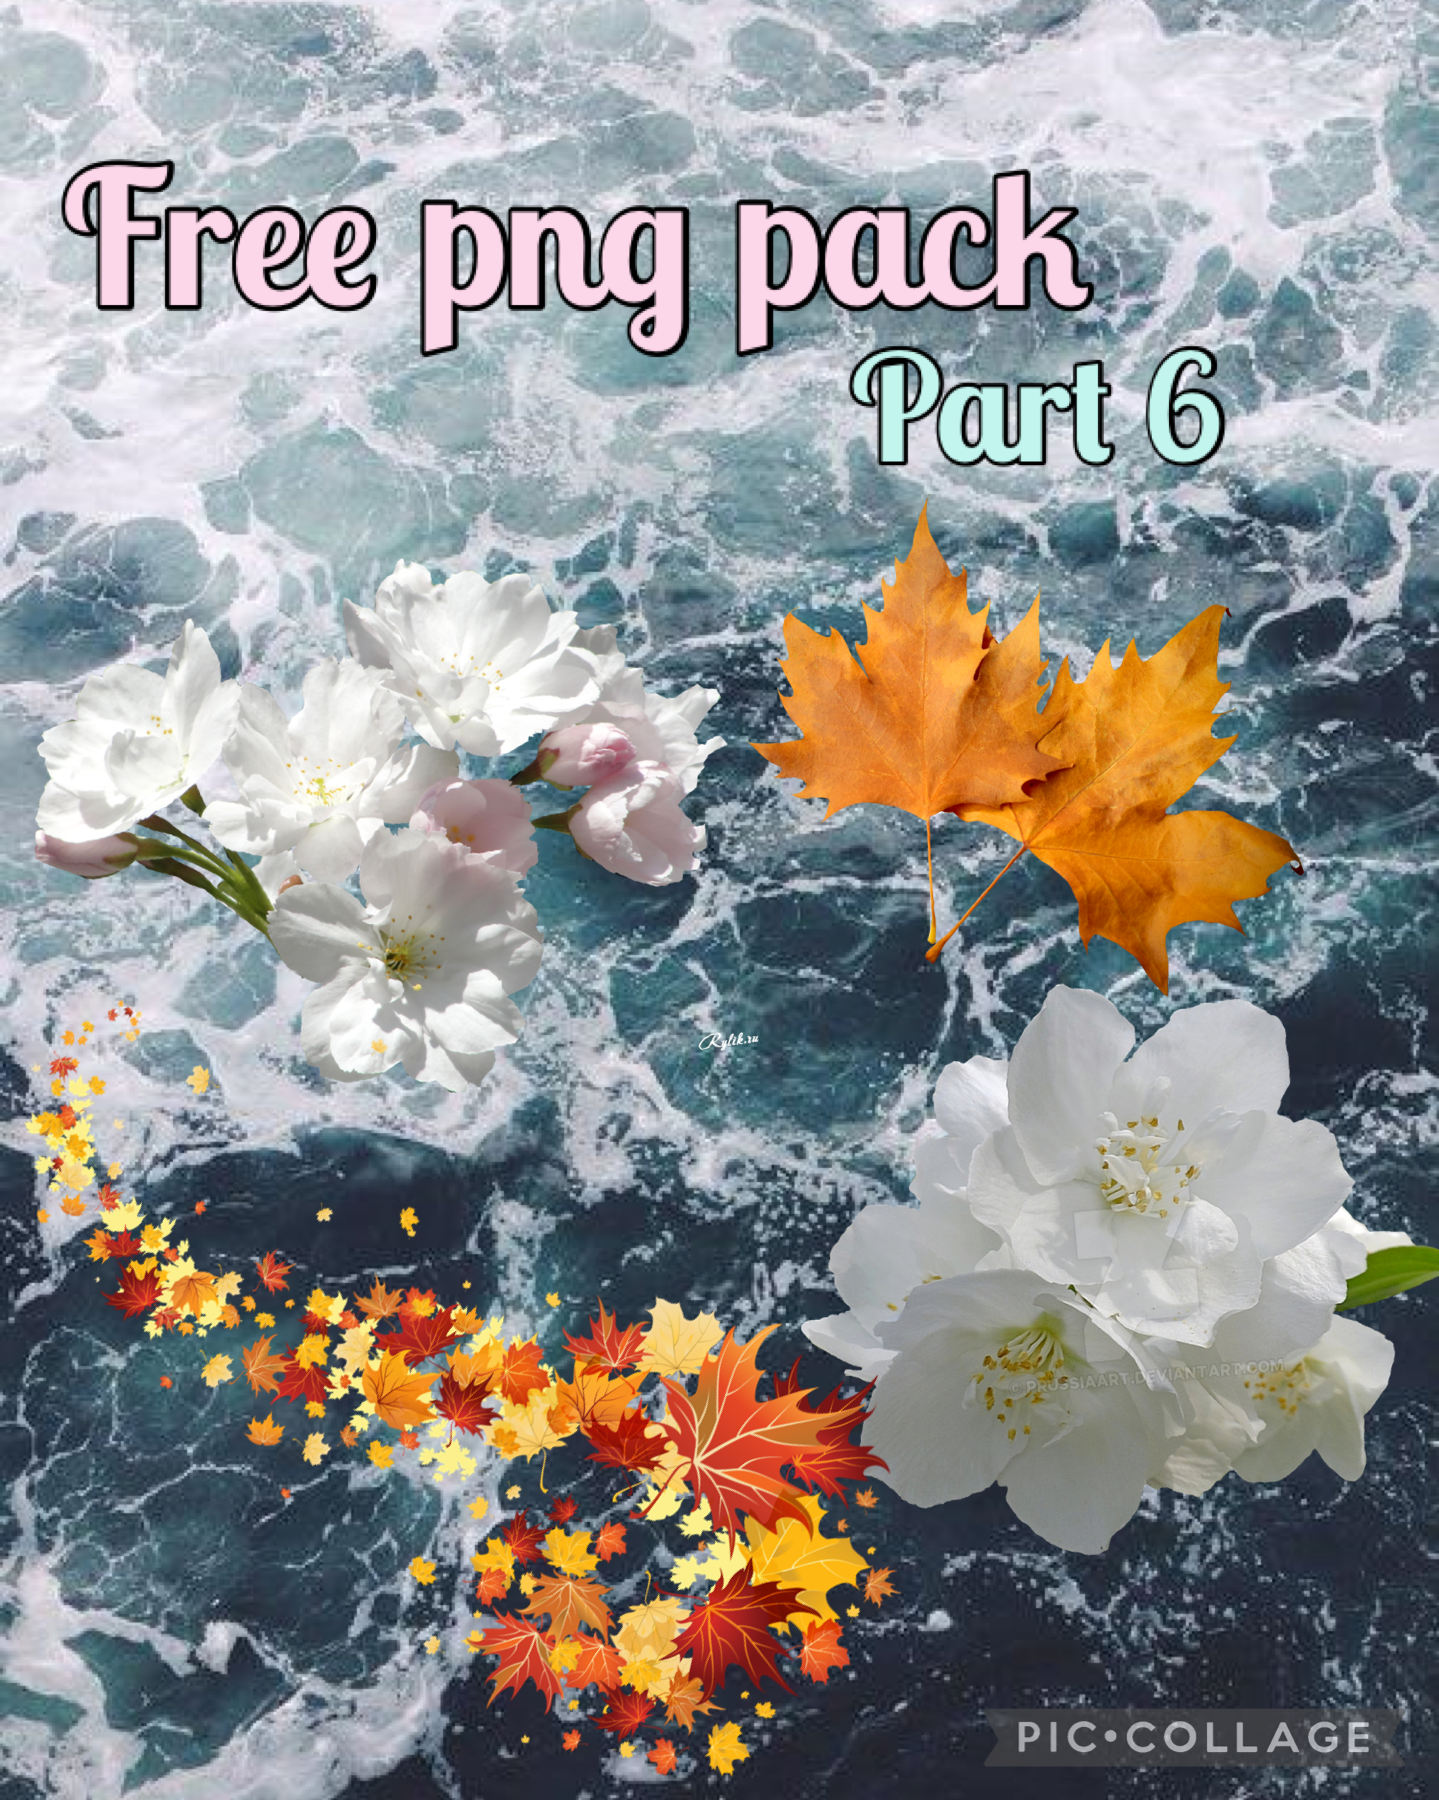 Free png pack part 31.8.21